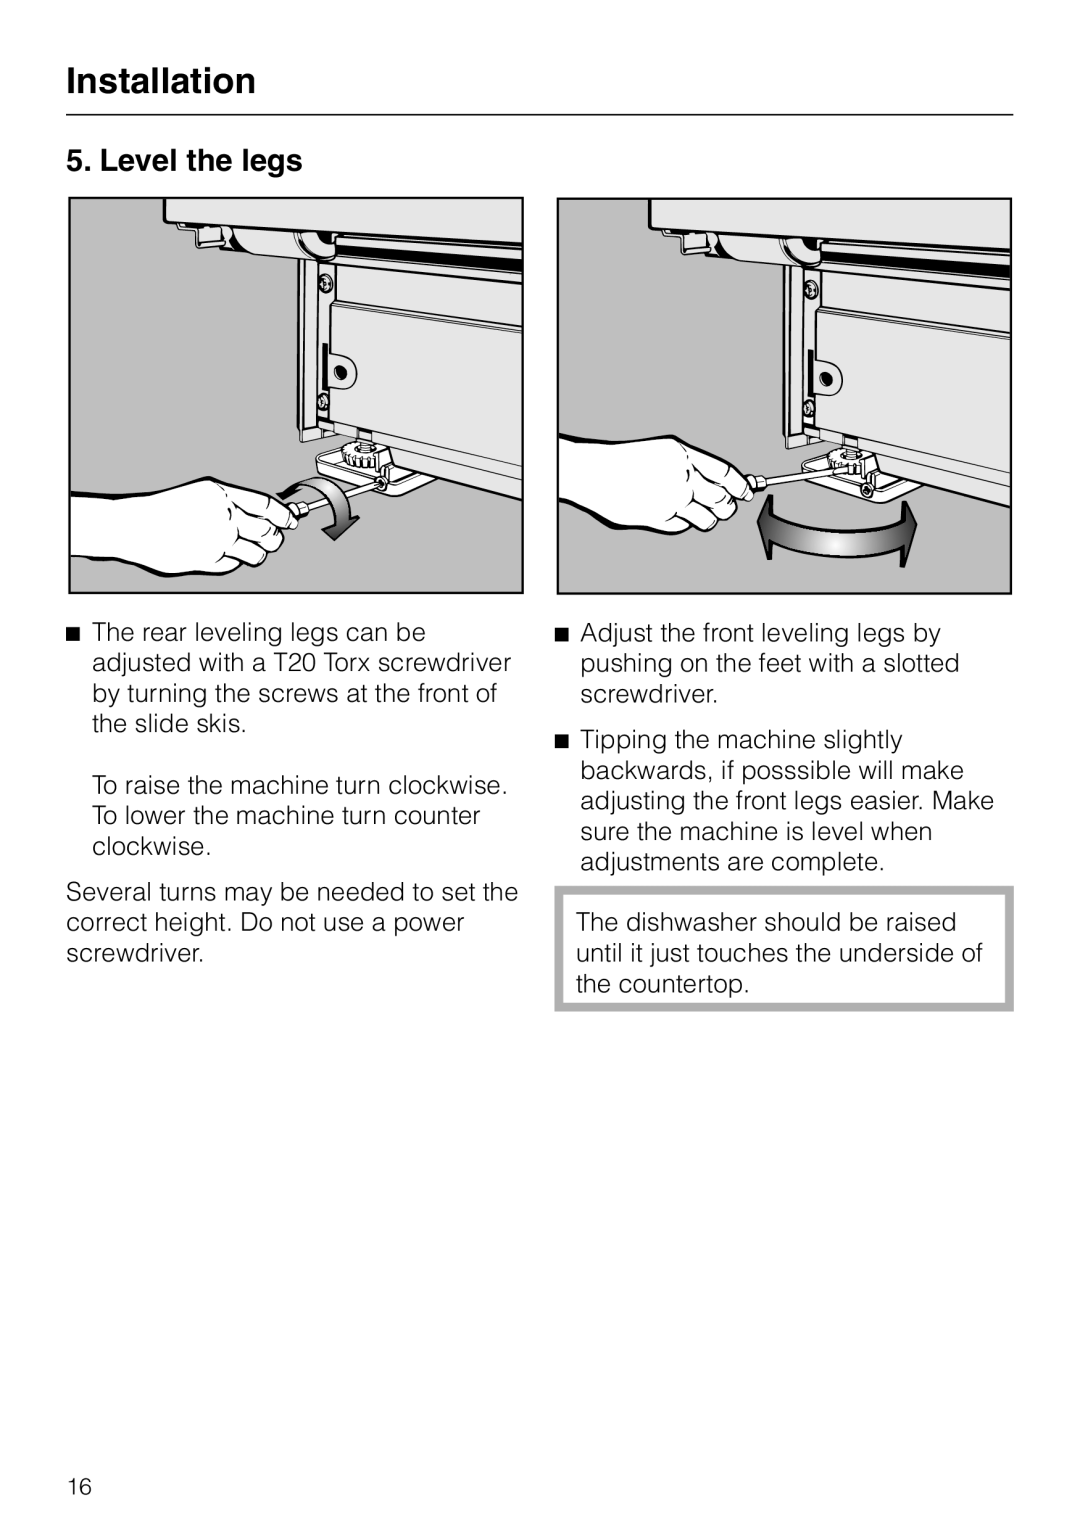 Miele HG01 installation instructions Level the legs, Installation 